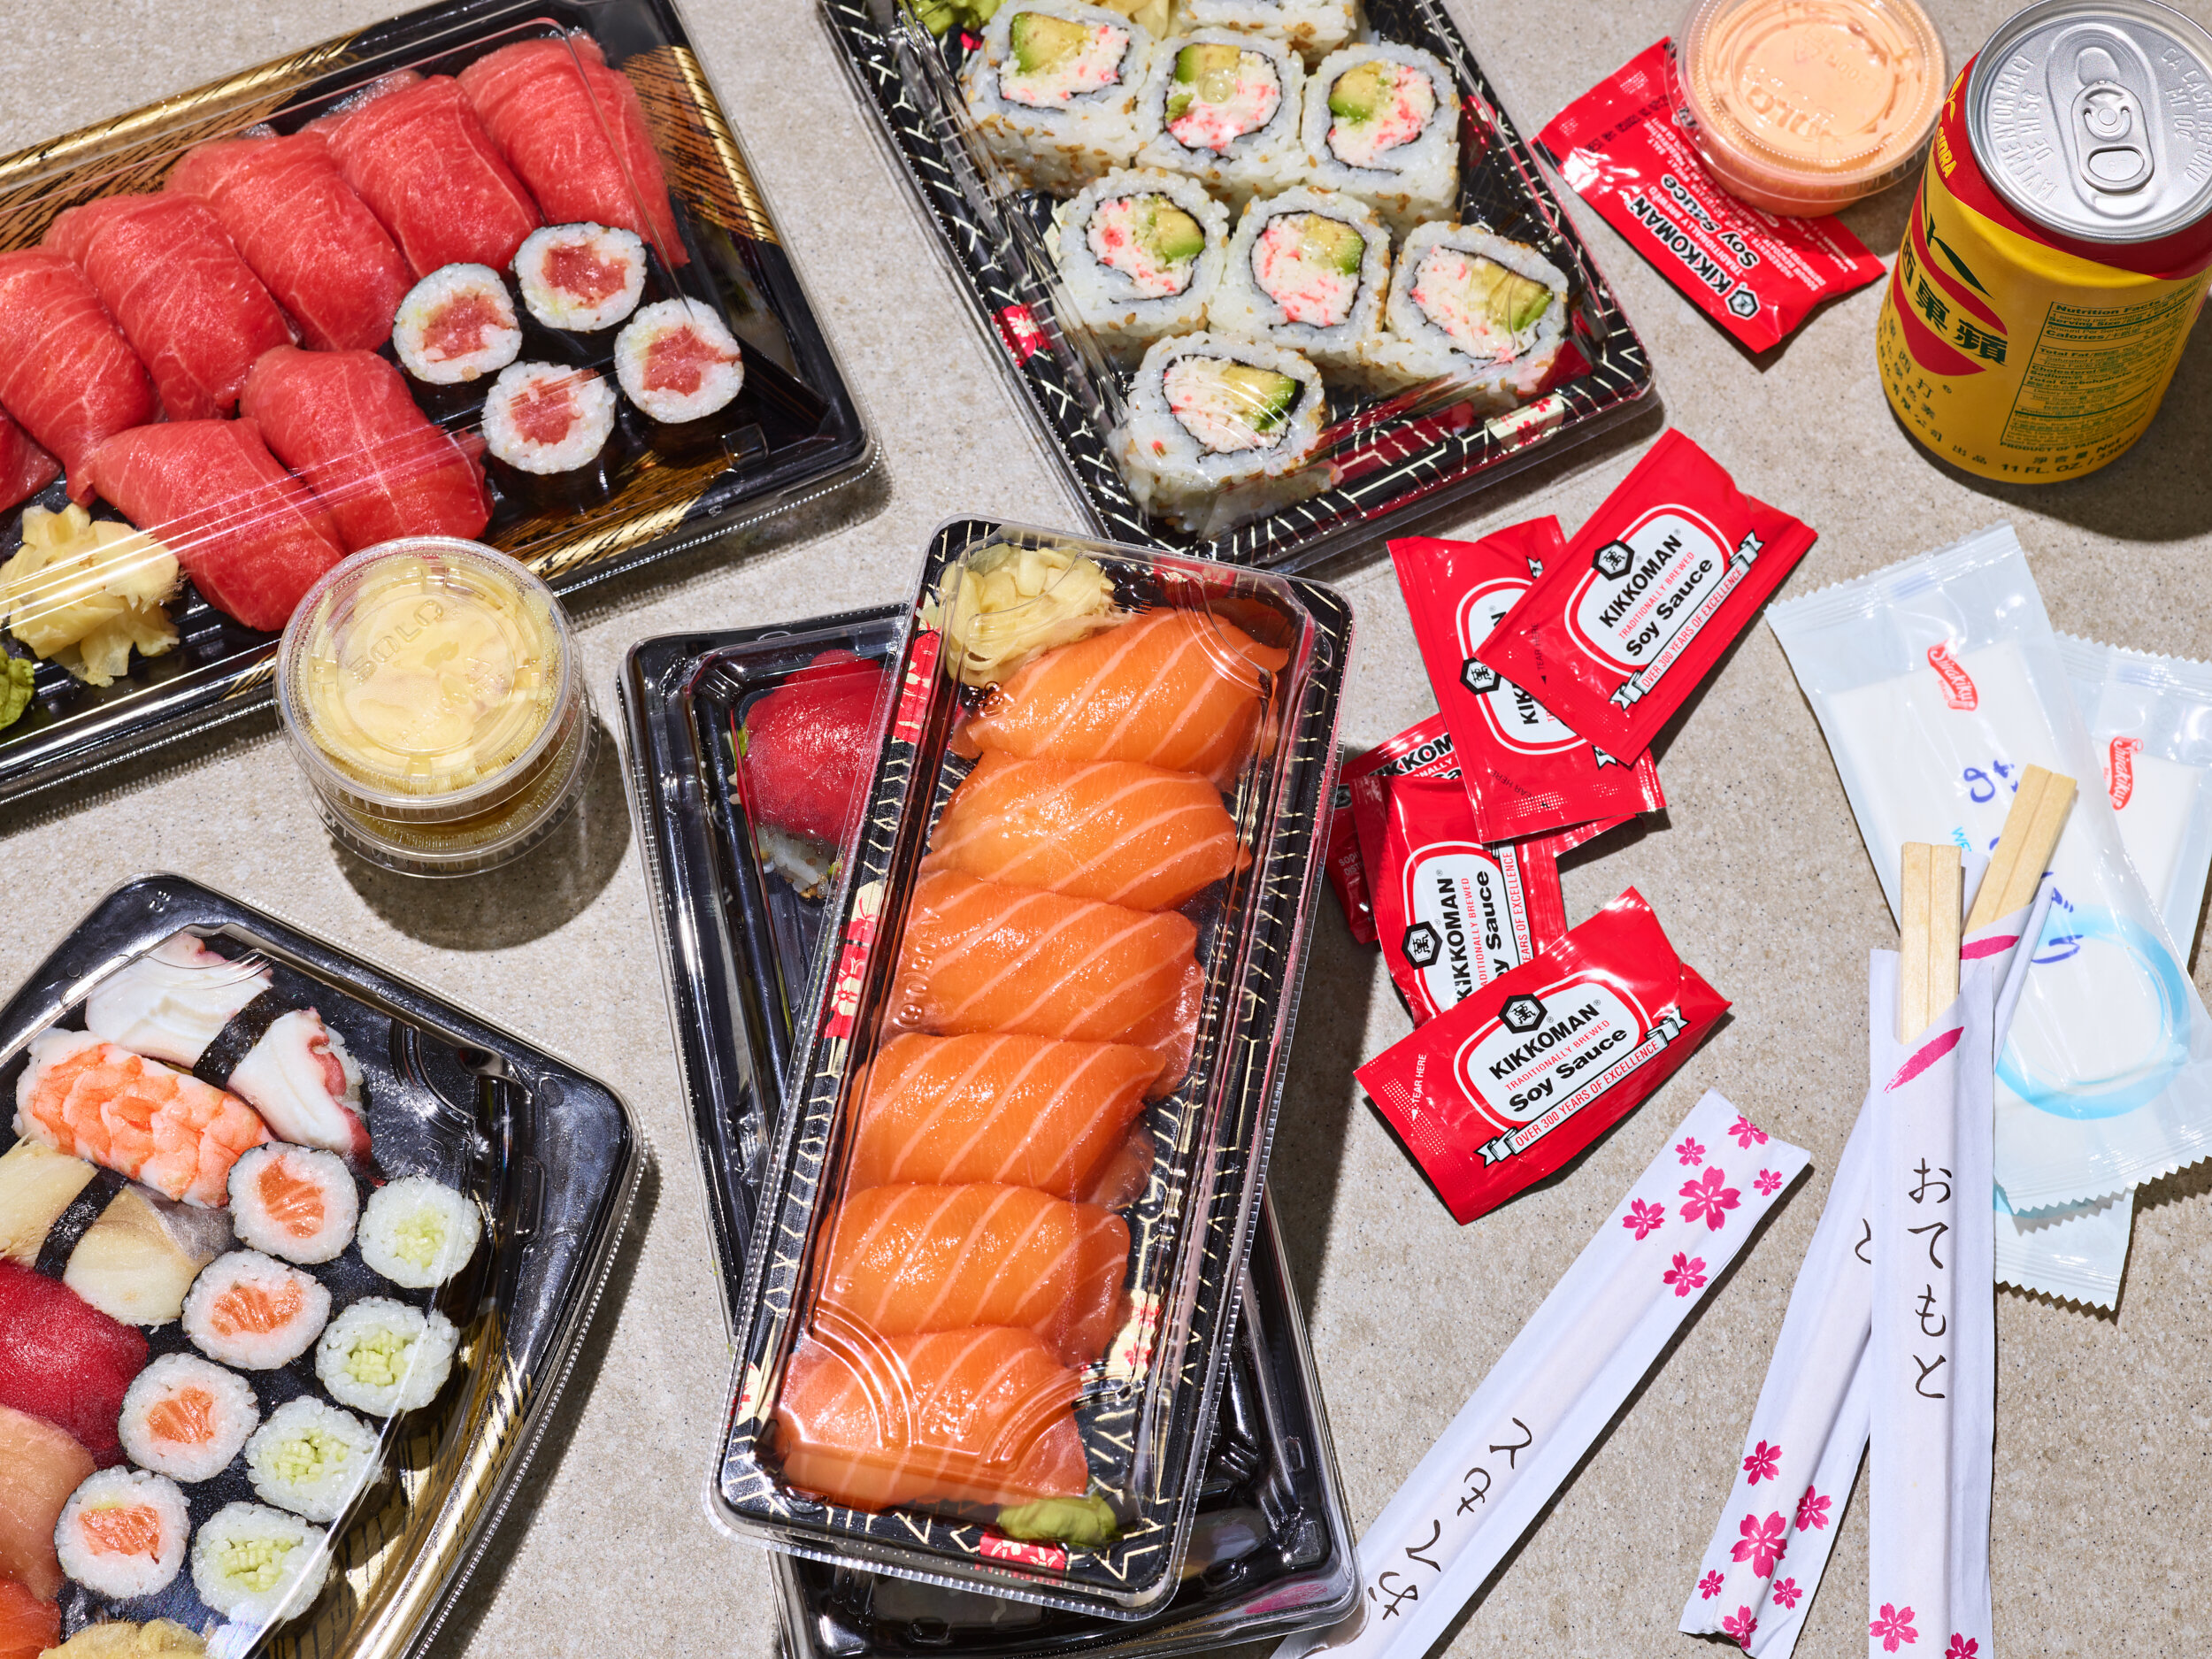 Sushi delivery from a Los Angeles restaurant in plastic packaging with serving utensils and a can of soda. Salmon, tuna, california roll, sashimi, toro, unagi, tomago. 